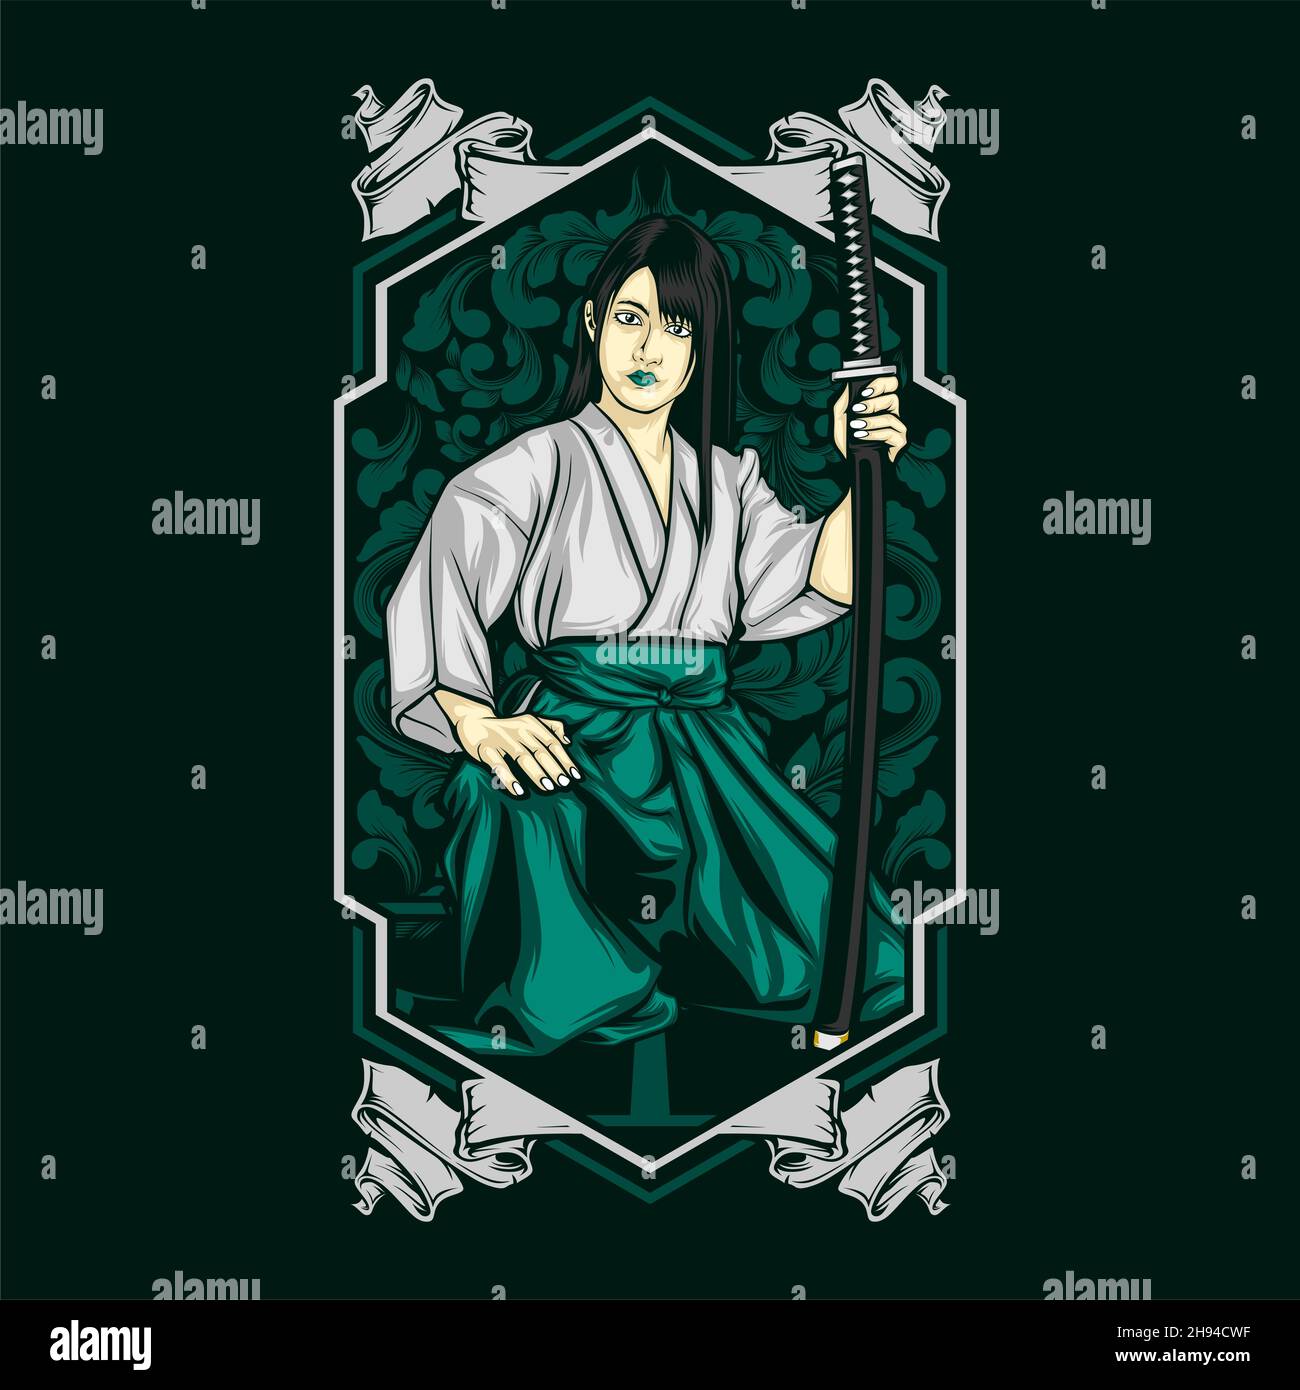 lady holding samurai with awesome background Stock Vector